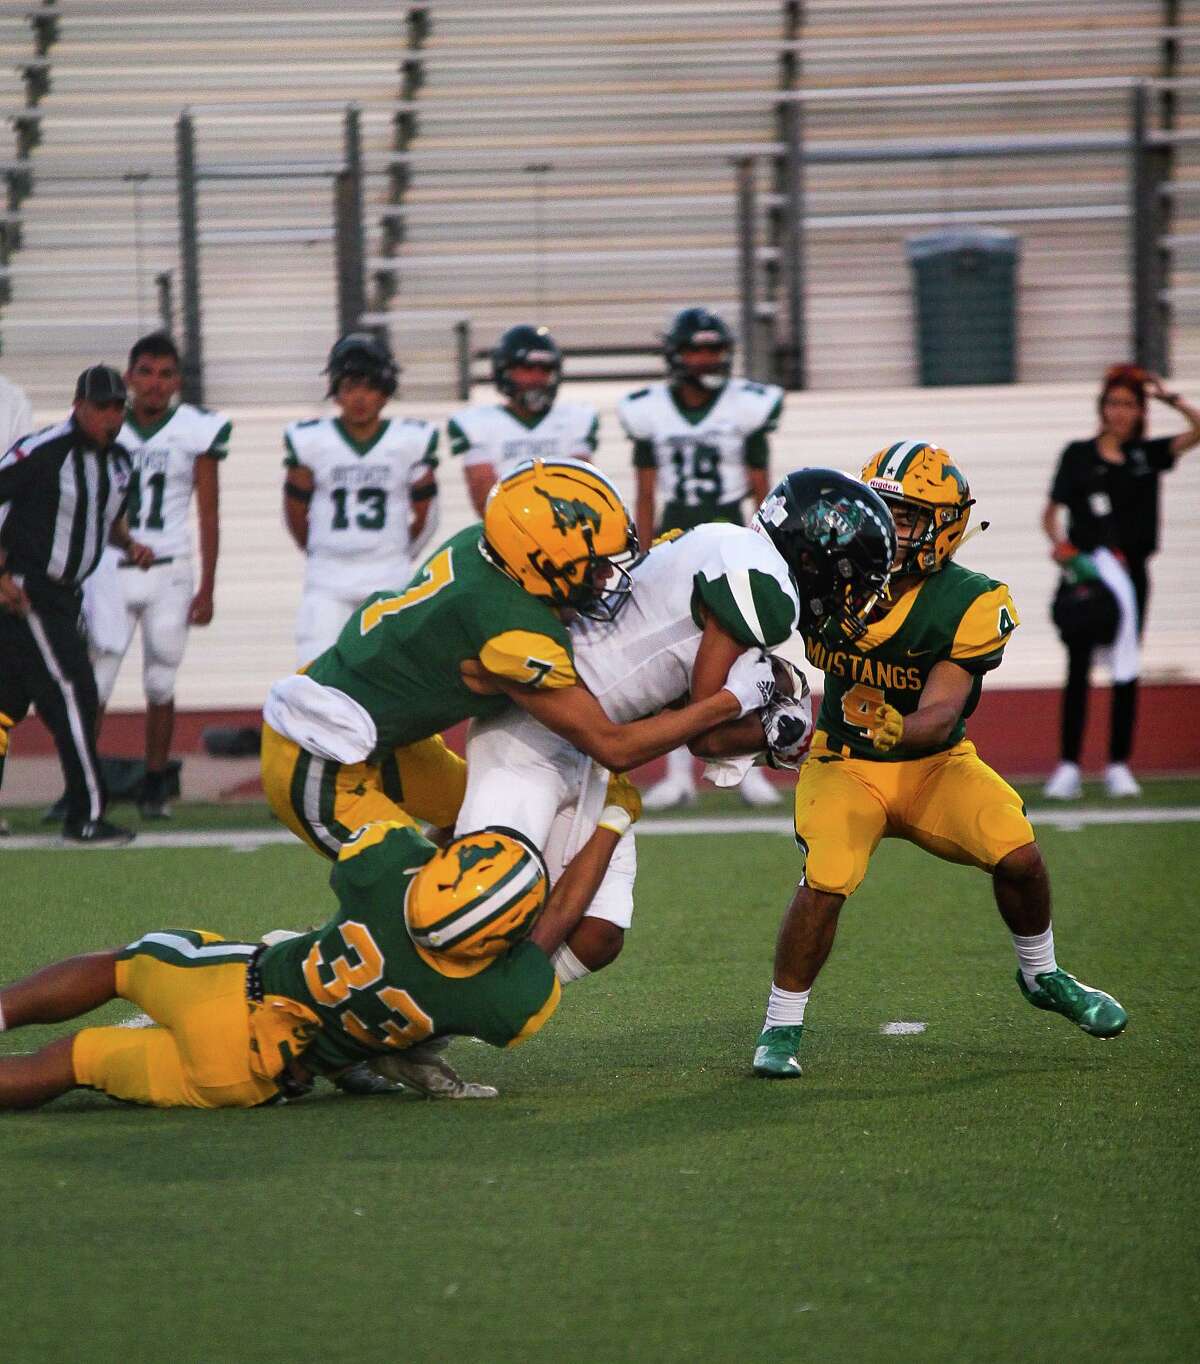 The Nixon Mustangs struggled against the Southwest Dragons Thursday as they fell 54-21.